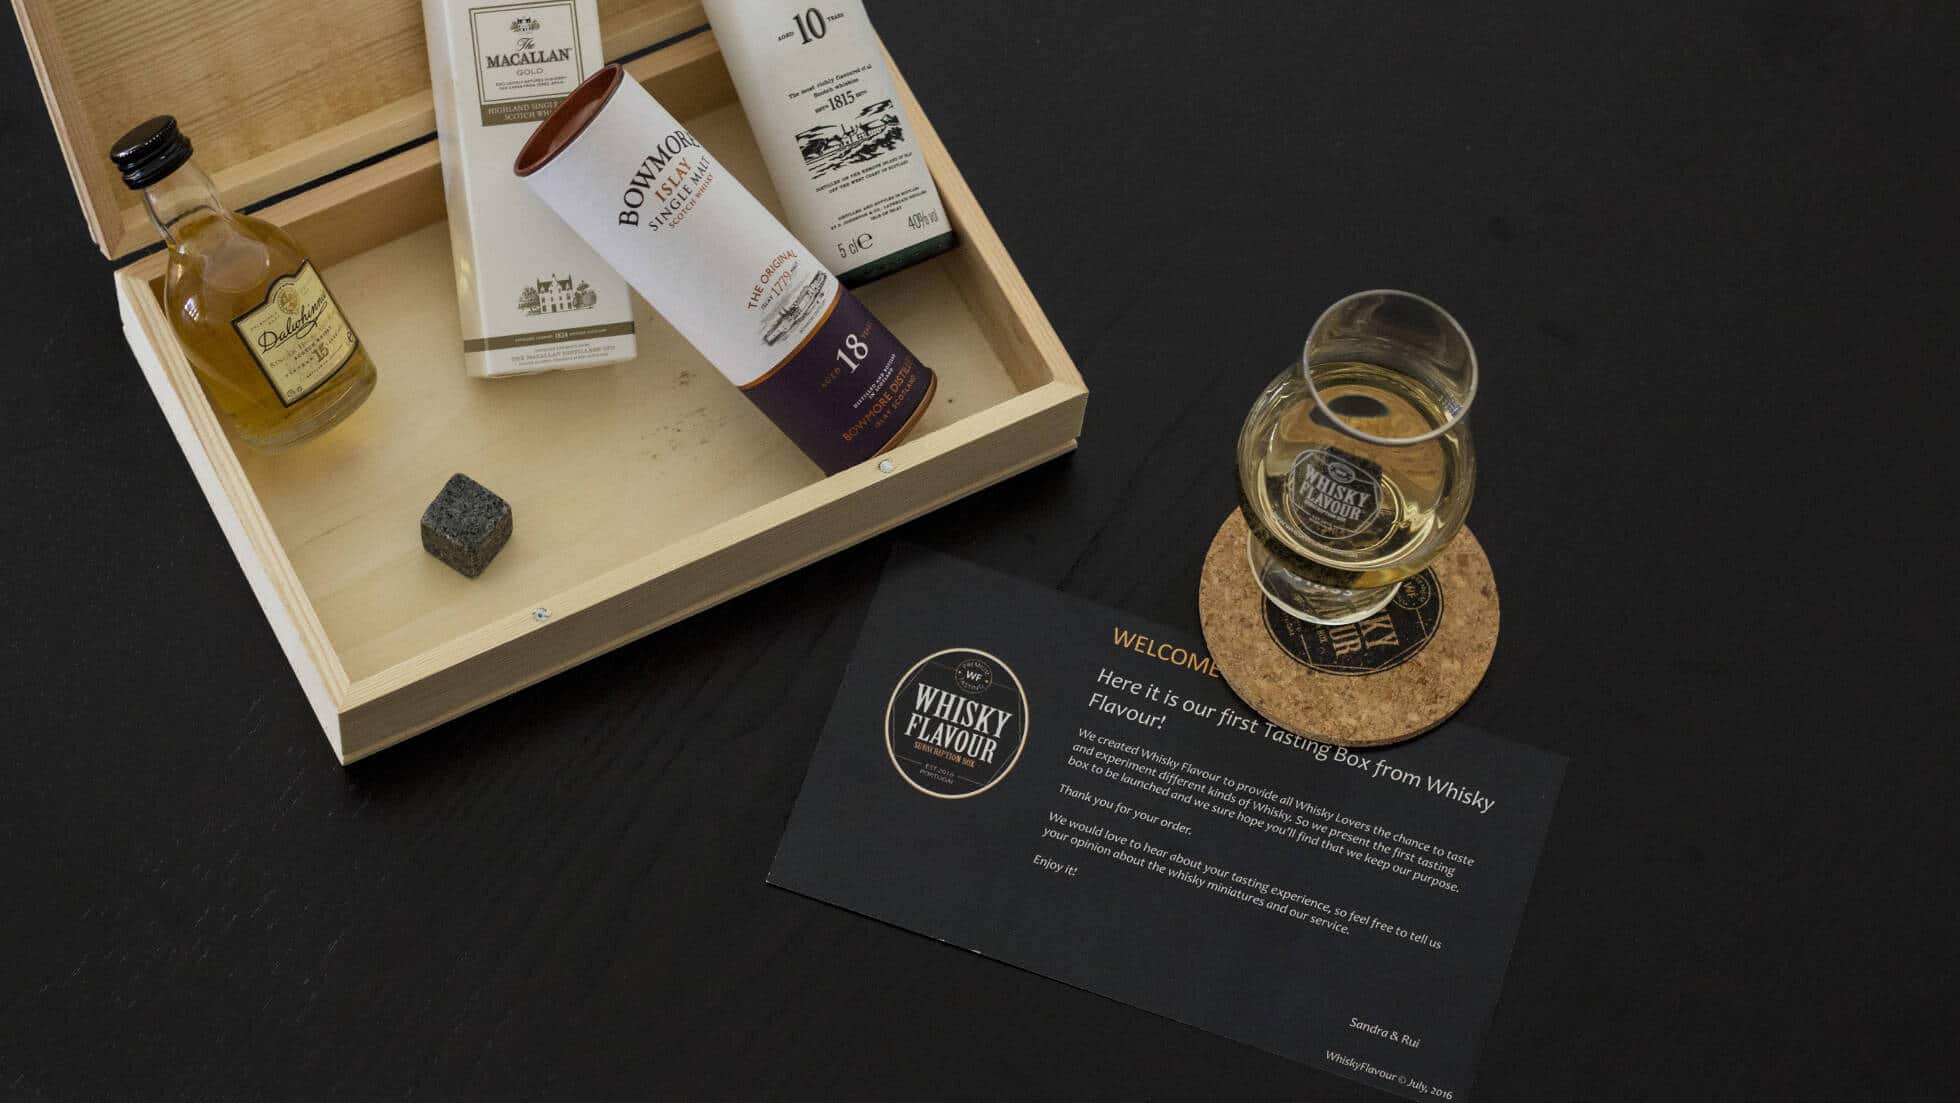 The Whisky Flavour Subscription Box